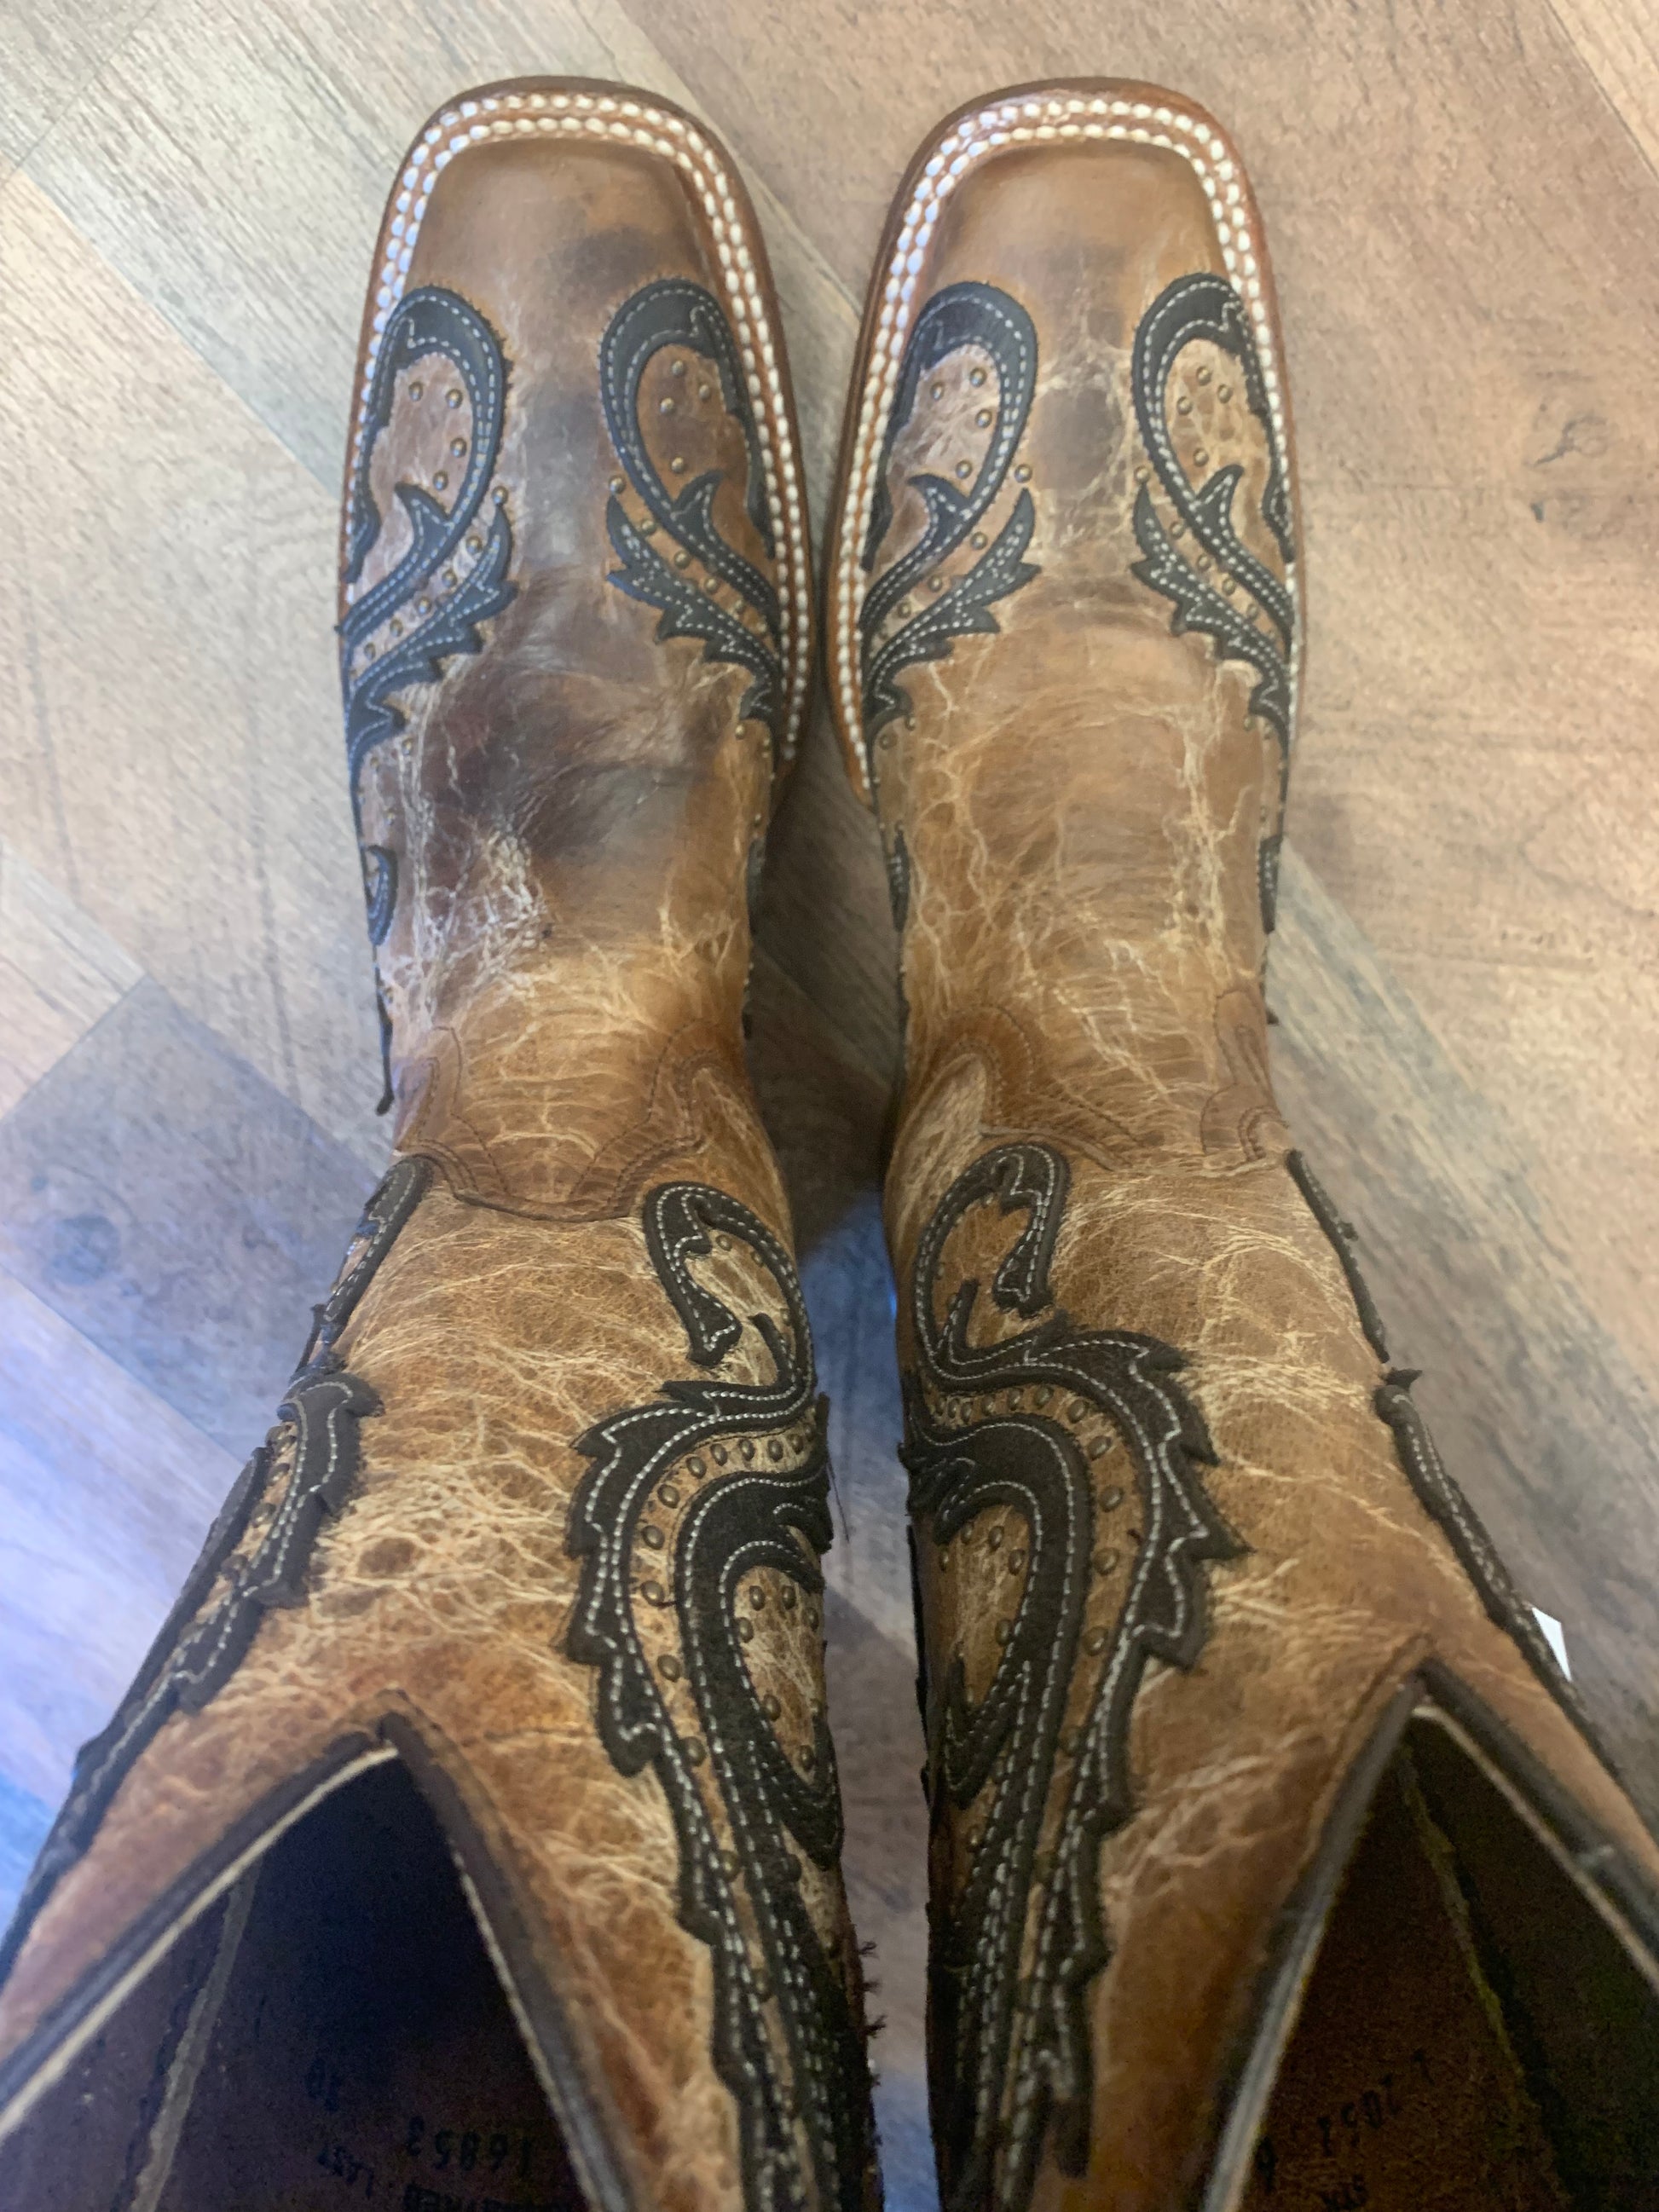 Corral Western Boots Overlay Embroidery Brown L2052